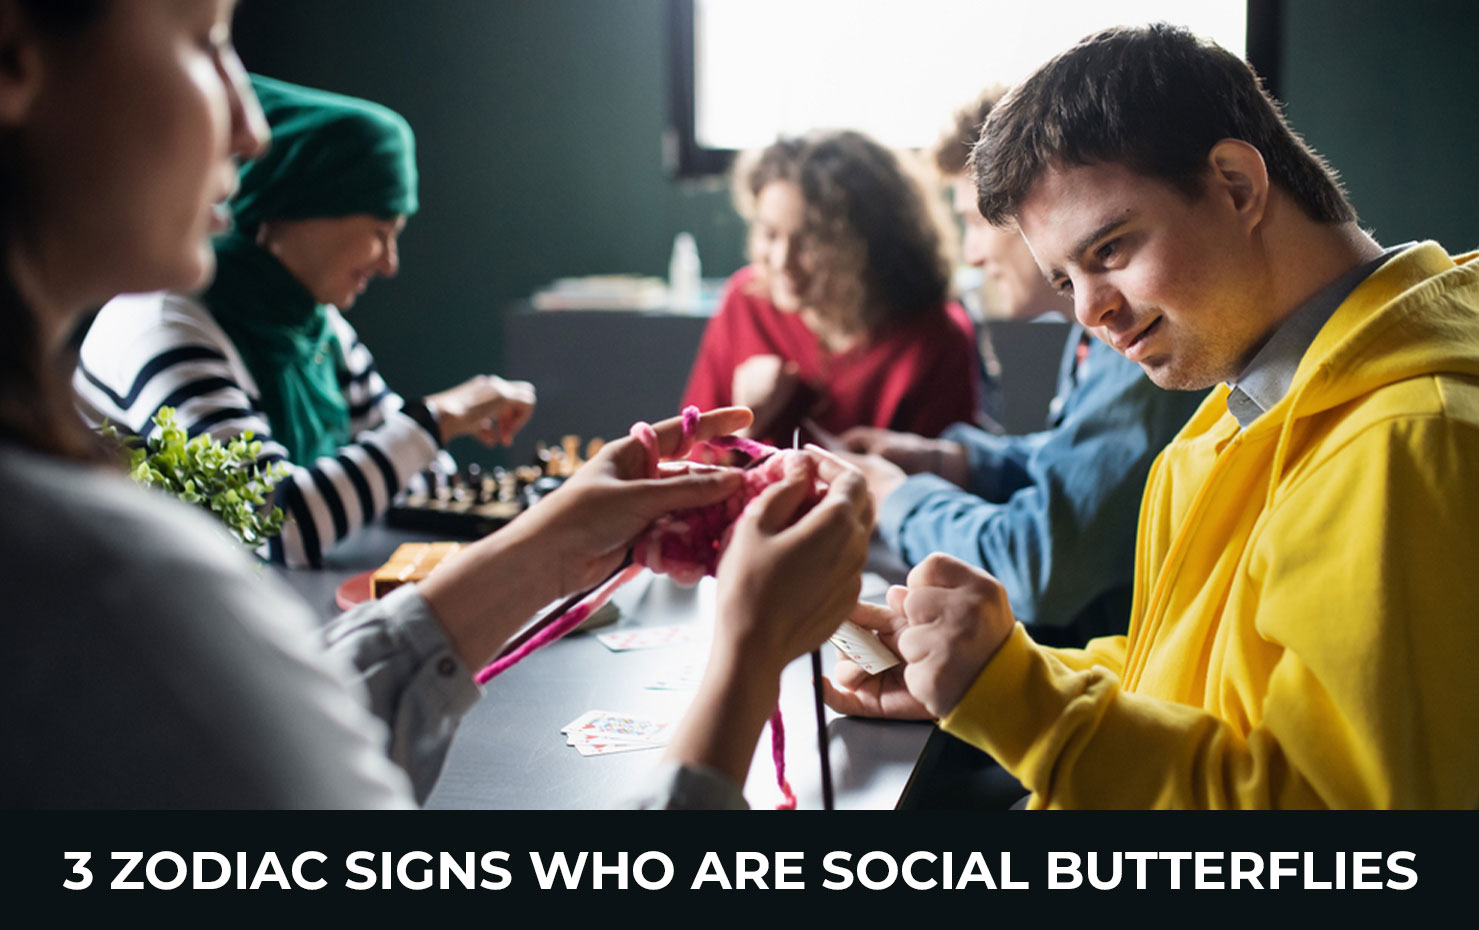 3 Zodiac Signs who Are Social Butterflies